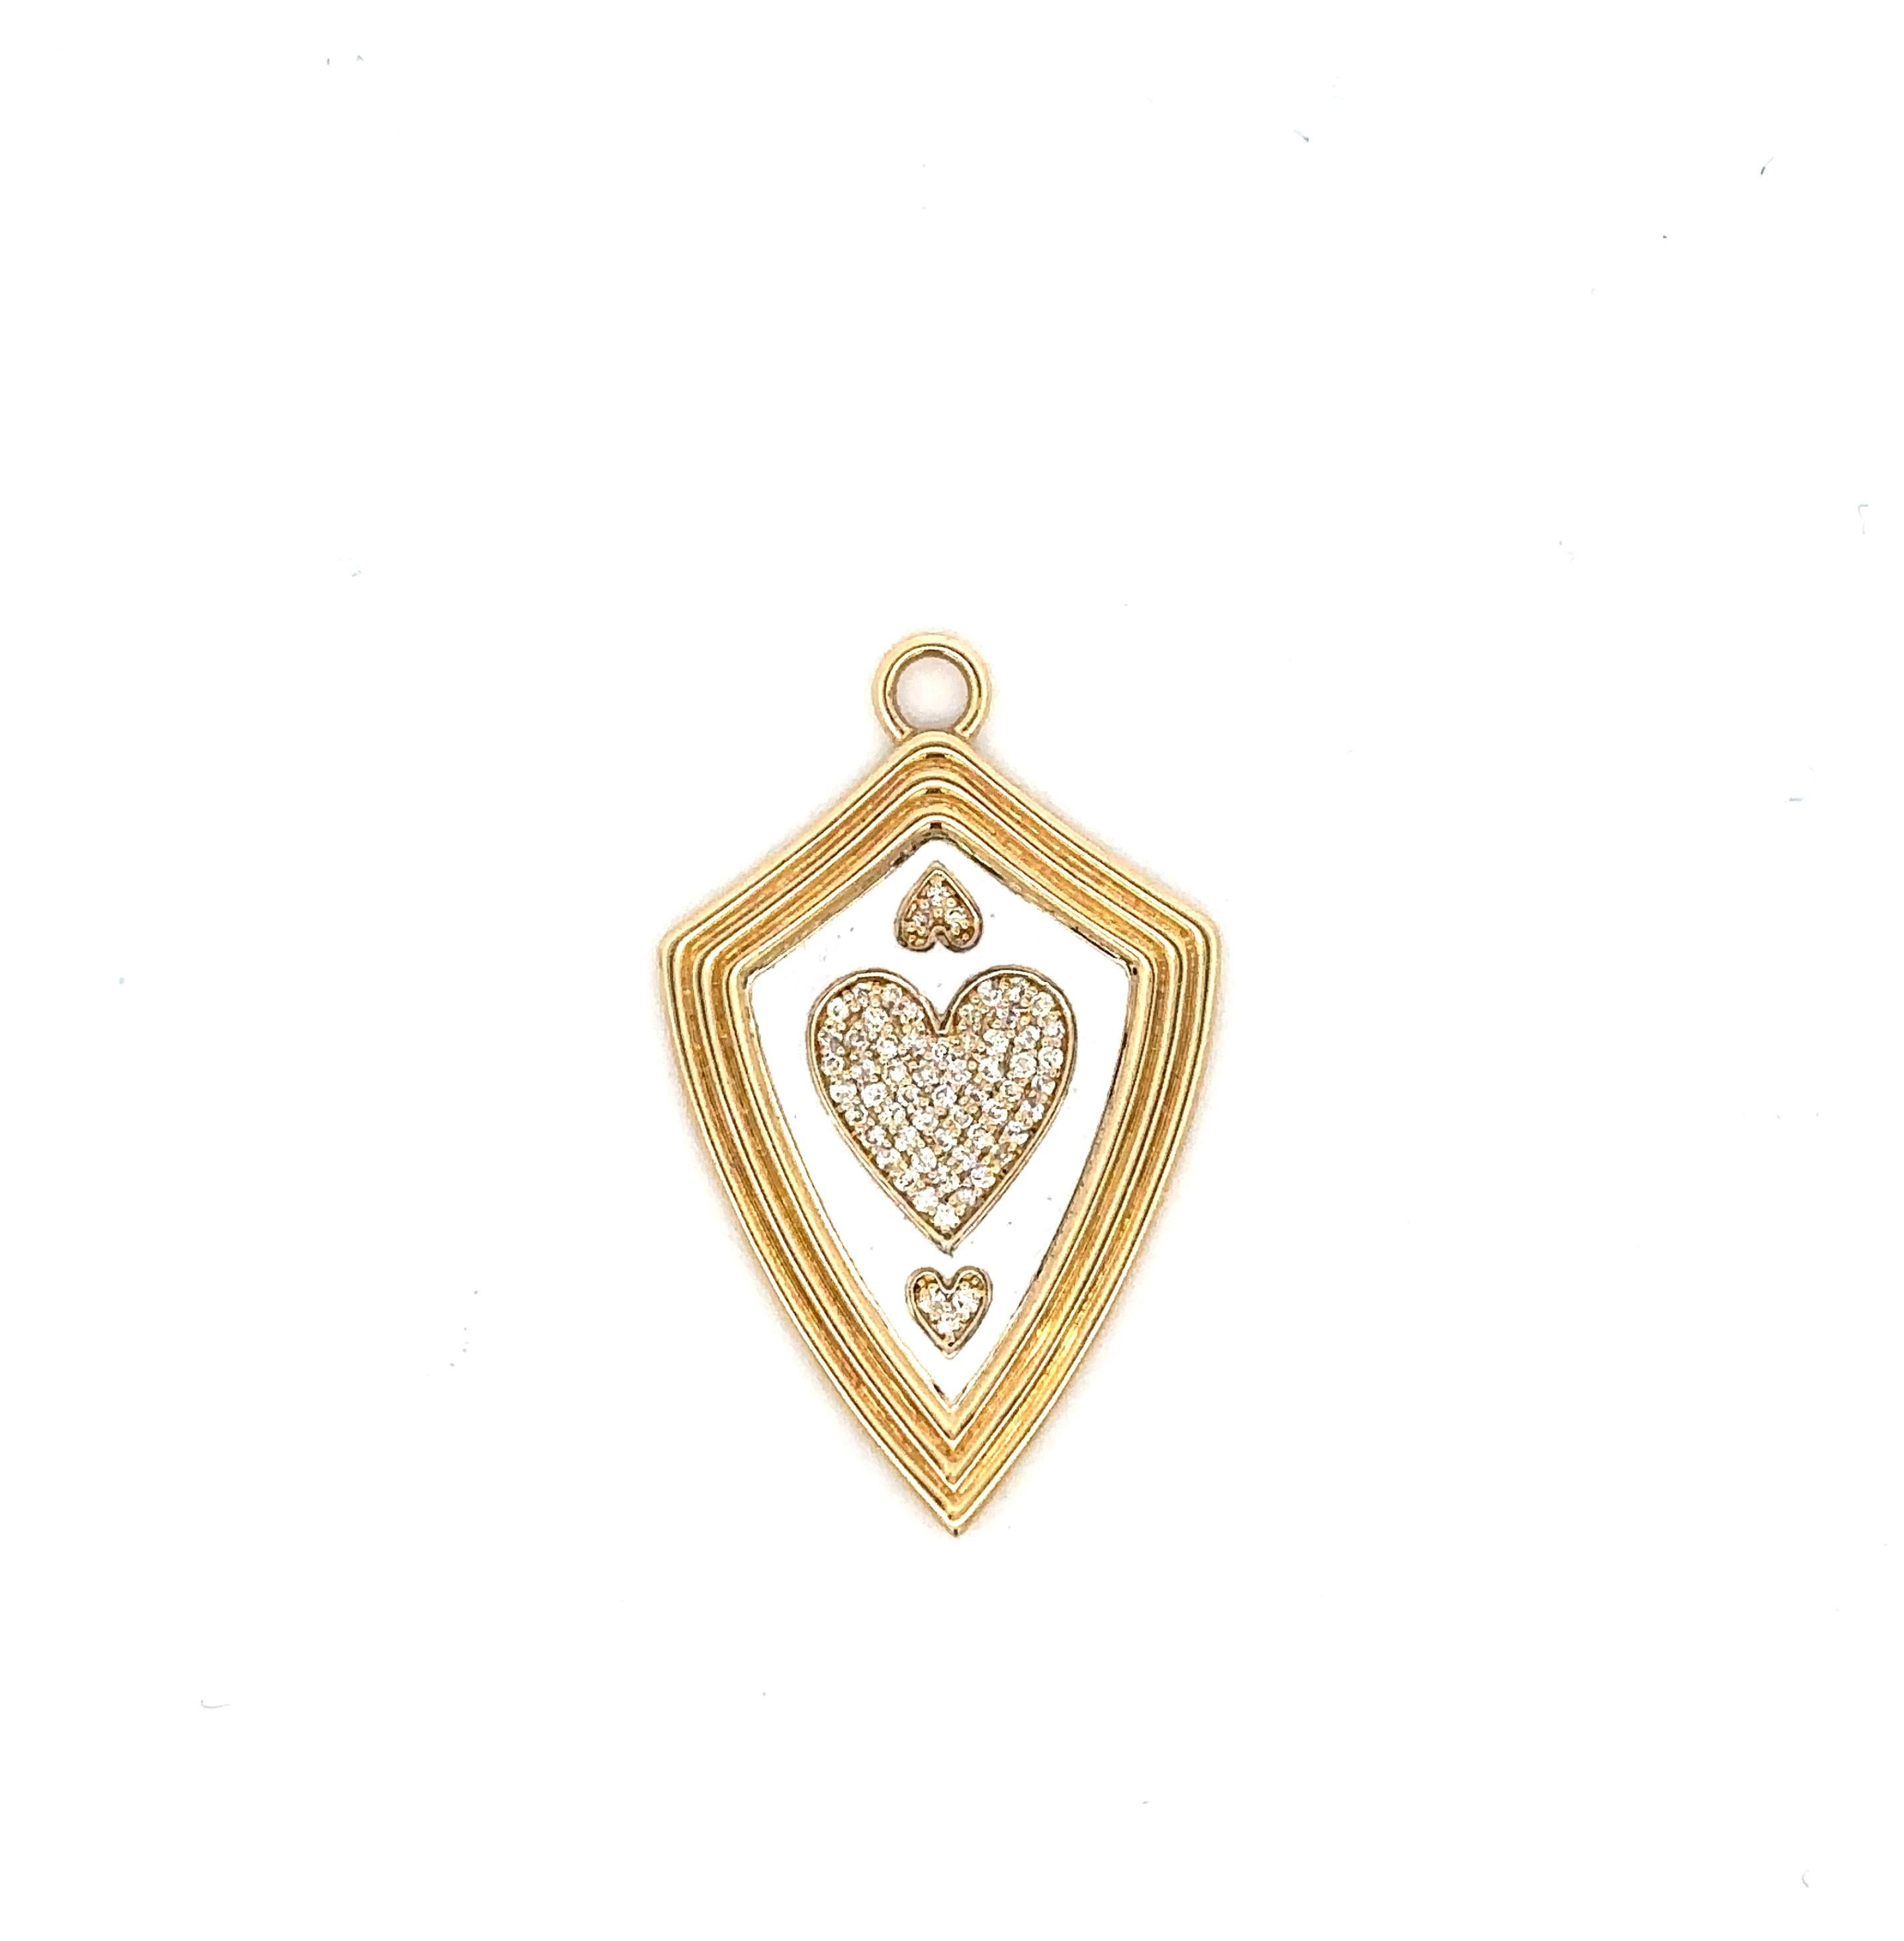 Adina Reyter One of a Kind White Ceramic Pavé Heart Shield Hinged Charm - Y14

Get ready to conquer the day with this One of a Kind White Ceramic Pavé Heart Shield Hinged Charm! 14k yellow gold and white ceramic hinged heart shield charm with